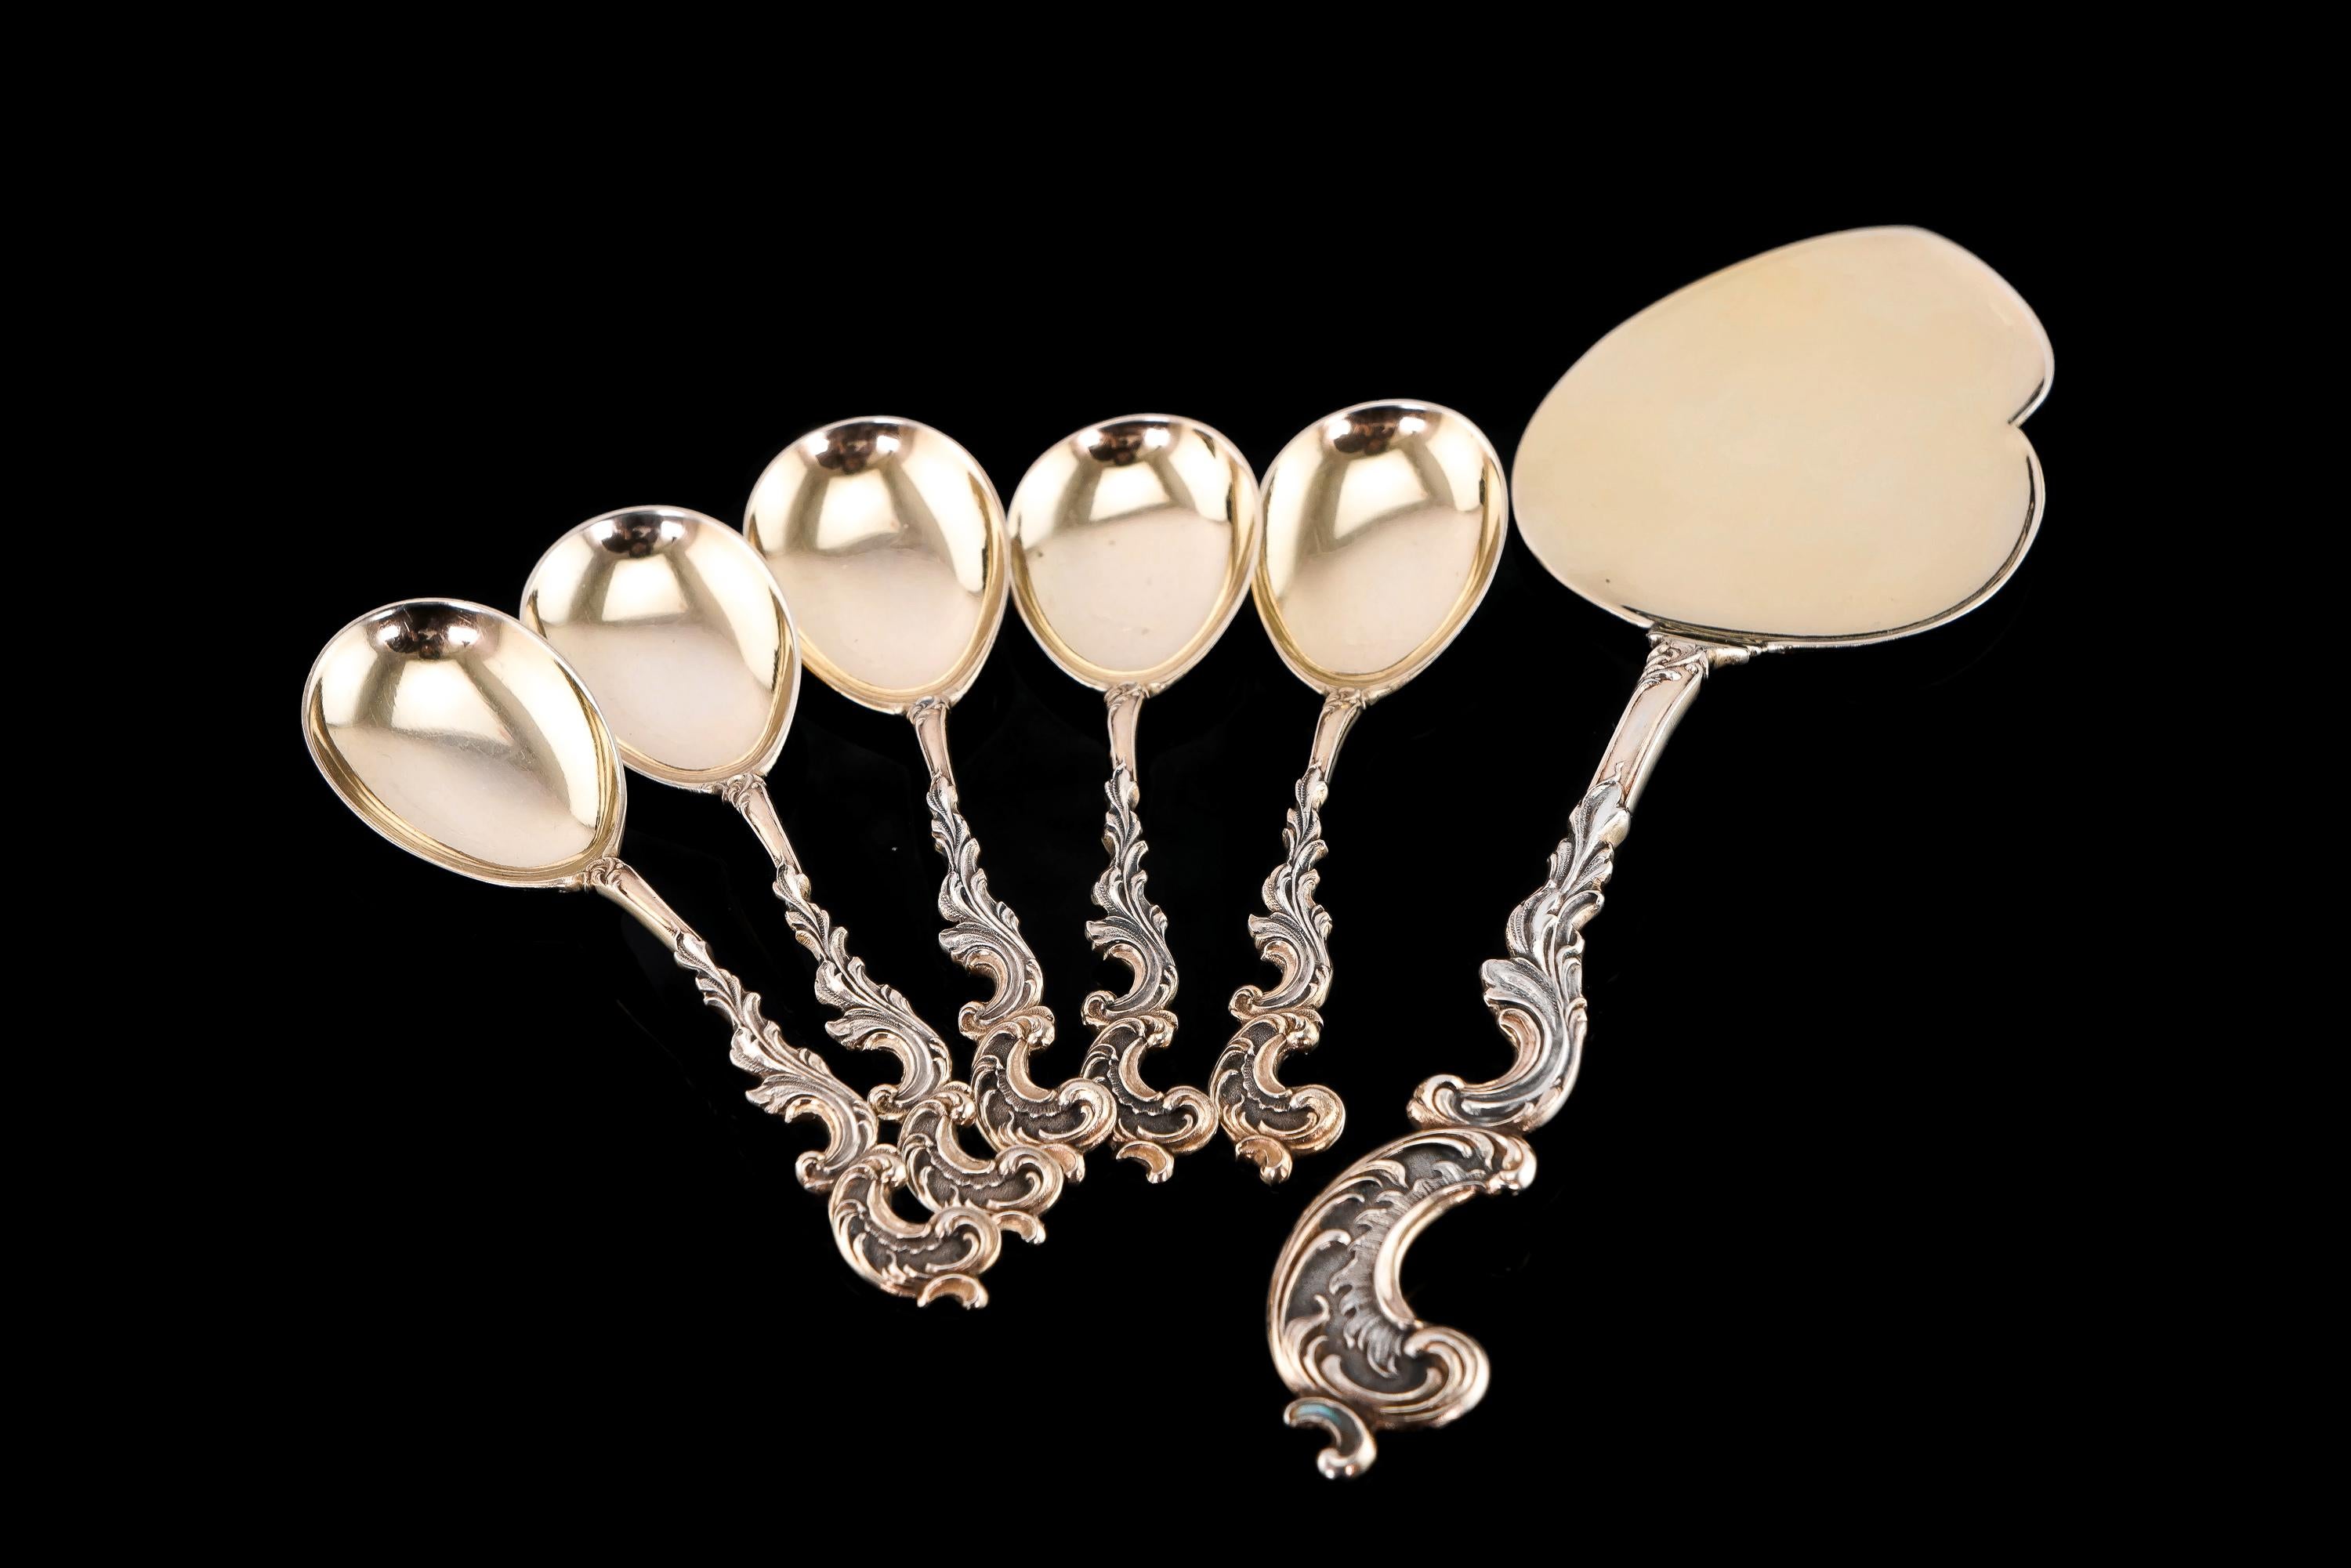 Antique German Solid Silver Icecream Server & Spoons in Rococo Style - c.1900 For Sale 4